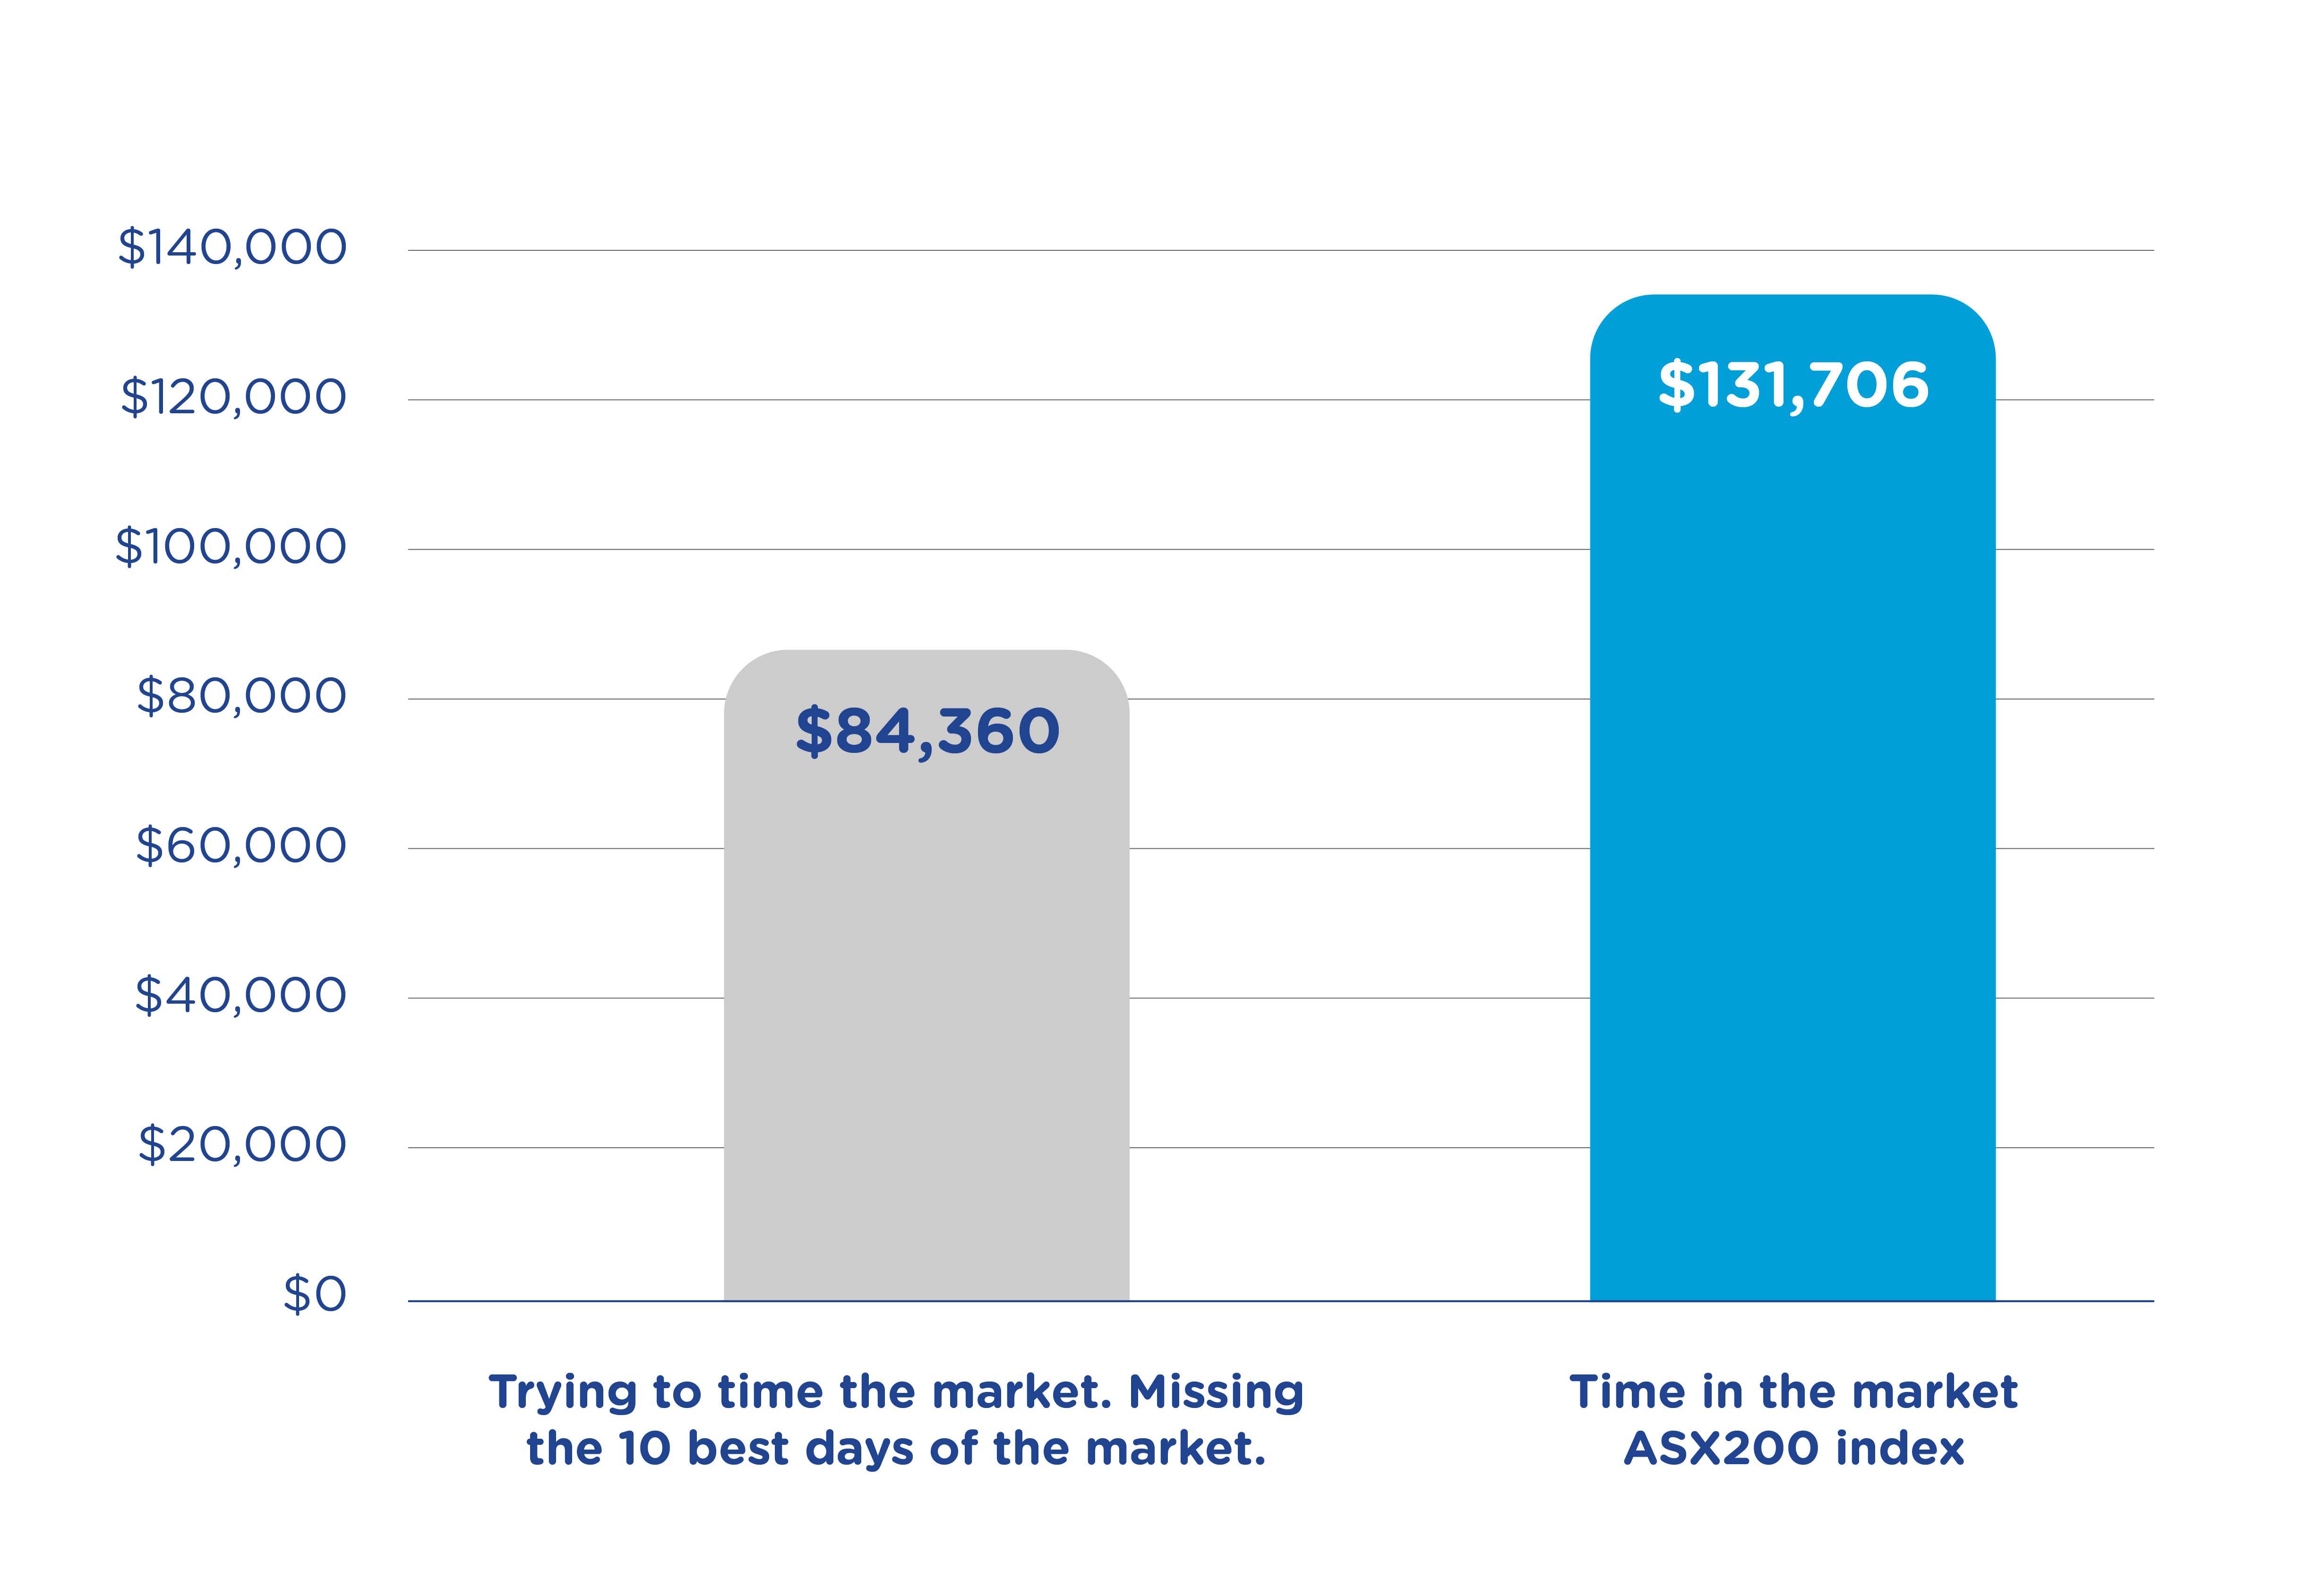 Trying to time the market. Missing the 10 best days of the market resulted in $84,360 returns. Time in the market ASX200 index resulted in $131,706 returns.